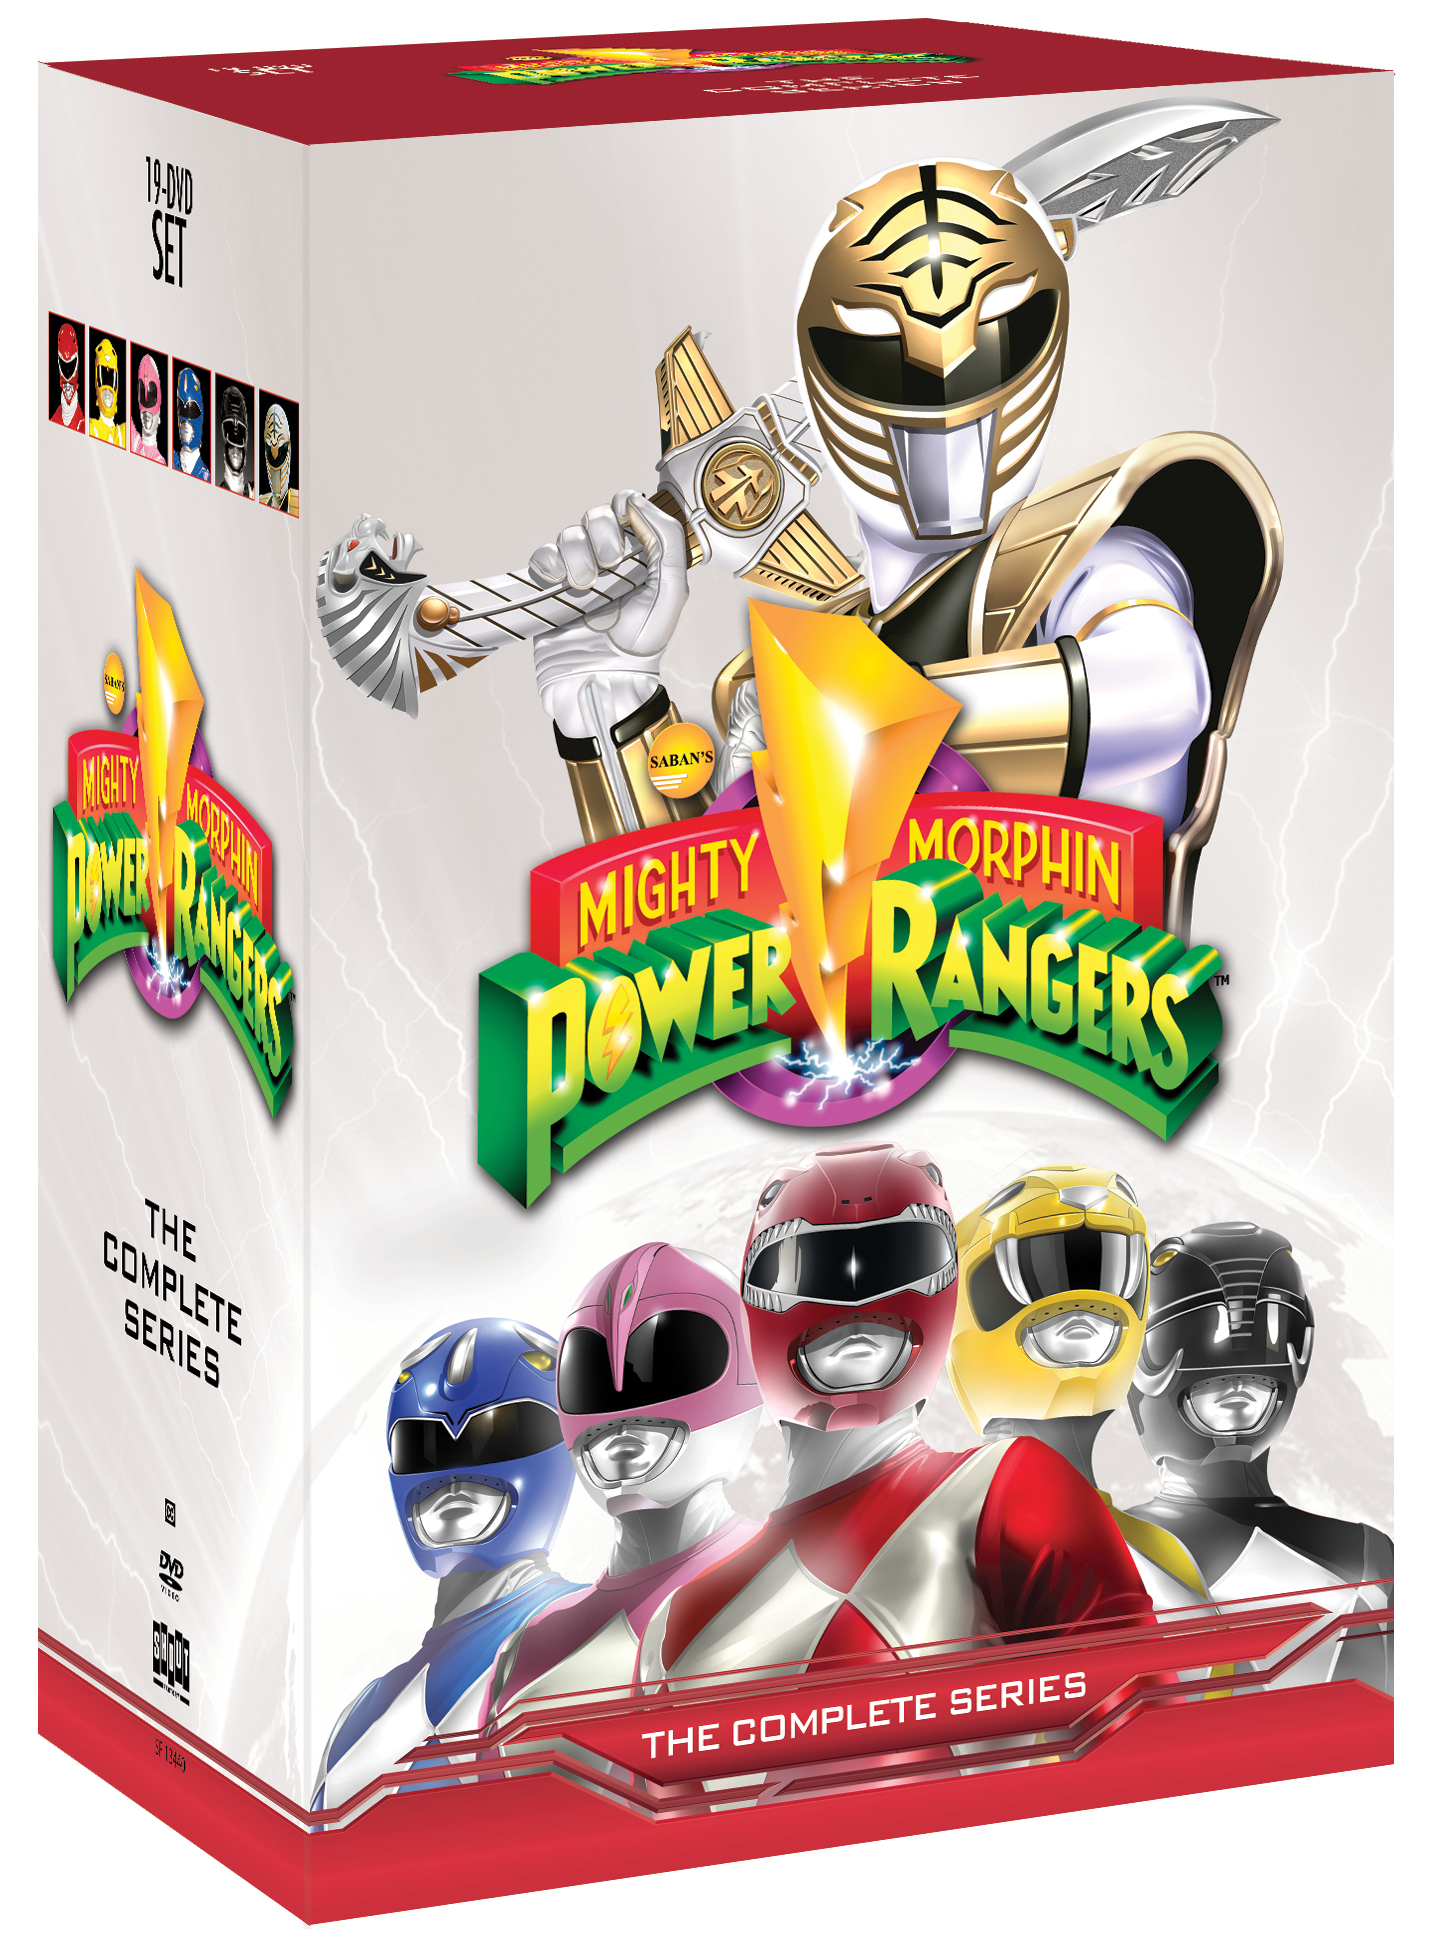 DVD Review: Mighty Morphin Power Rangers: The Complete Series.